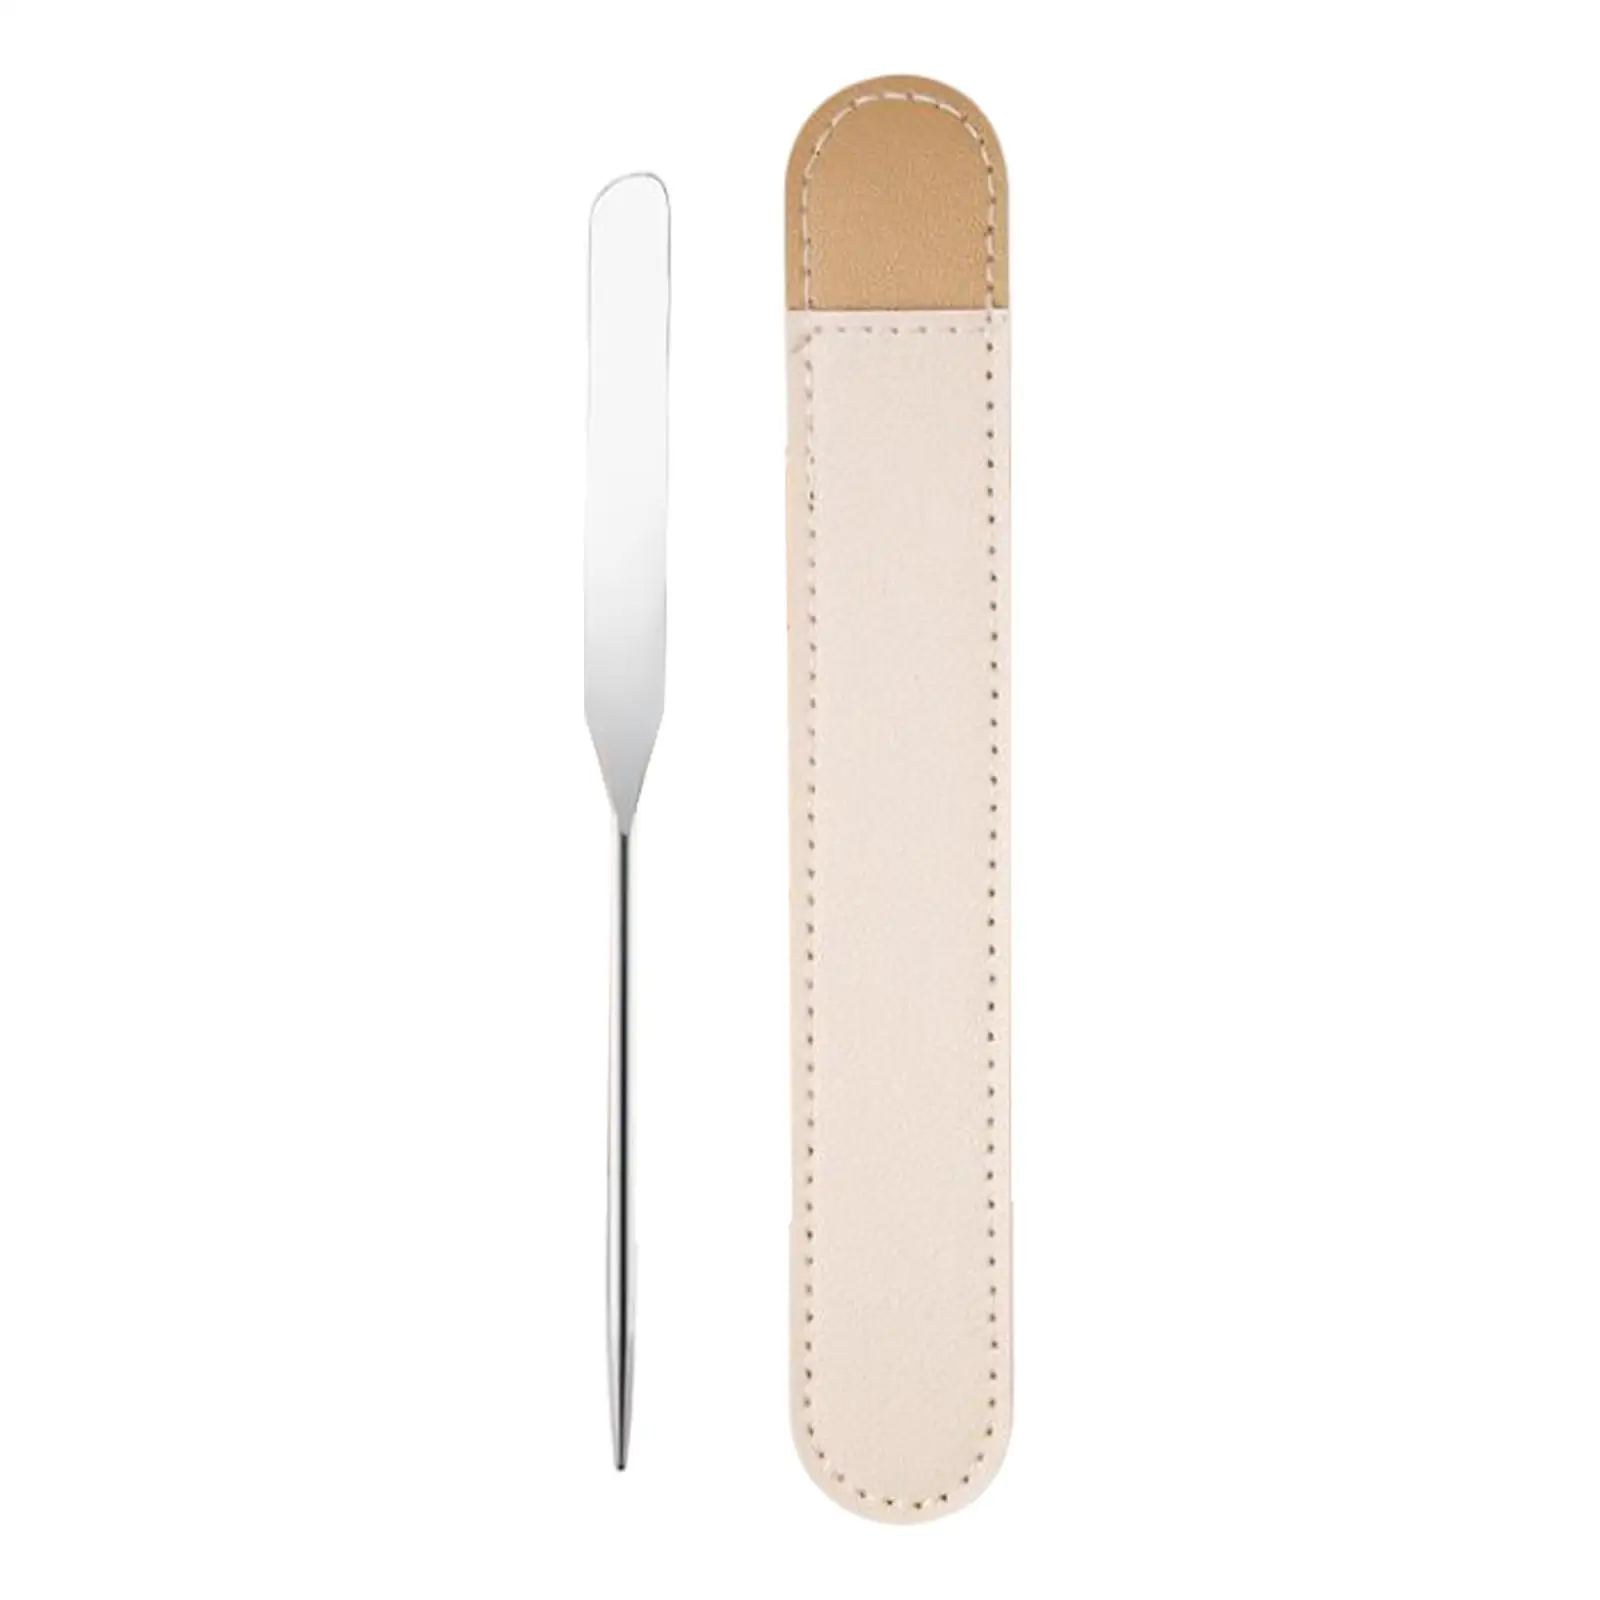 Double Sided makeup spatula Reusable Stainless Steel Makeup Stirring Rod for Artist